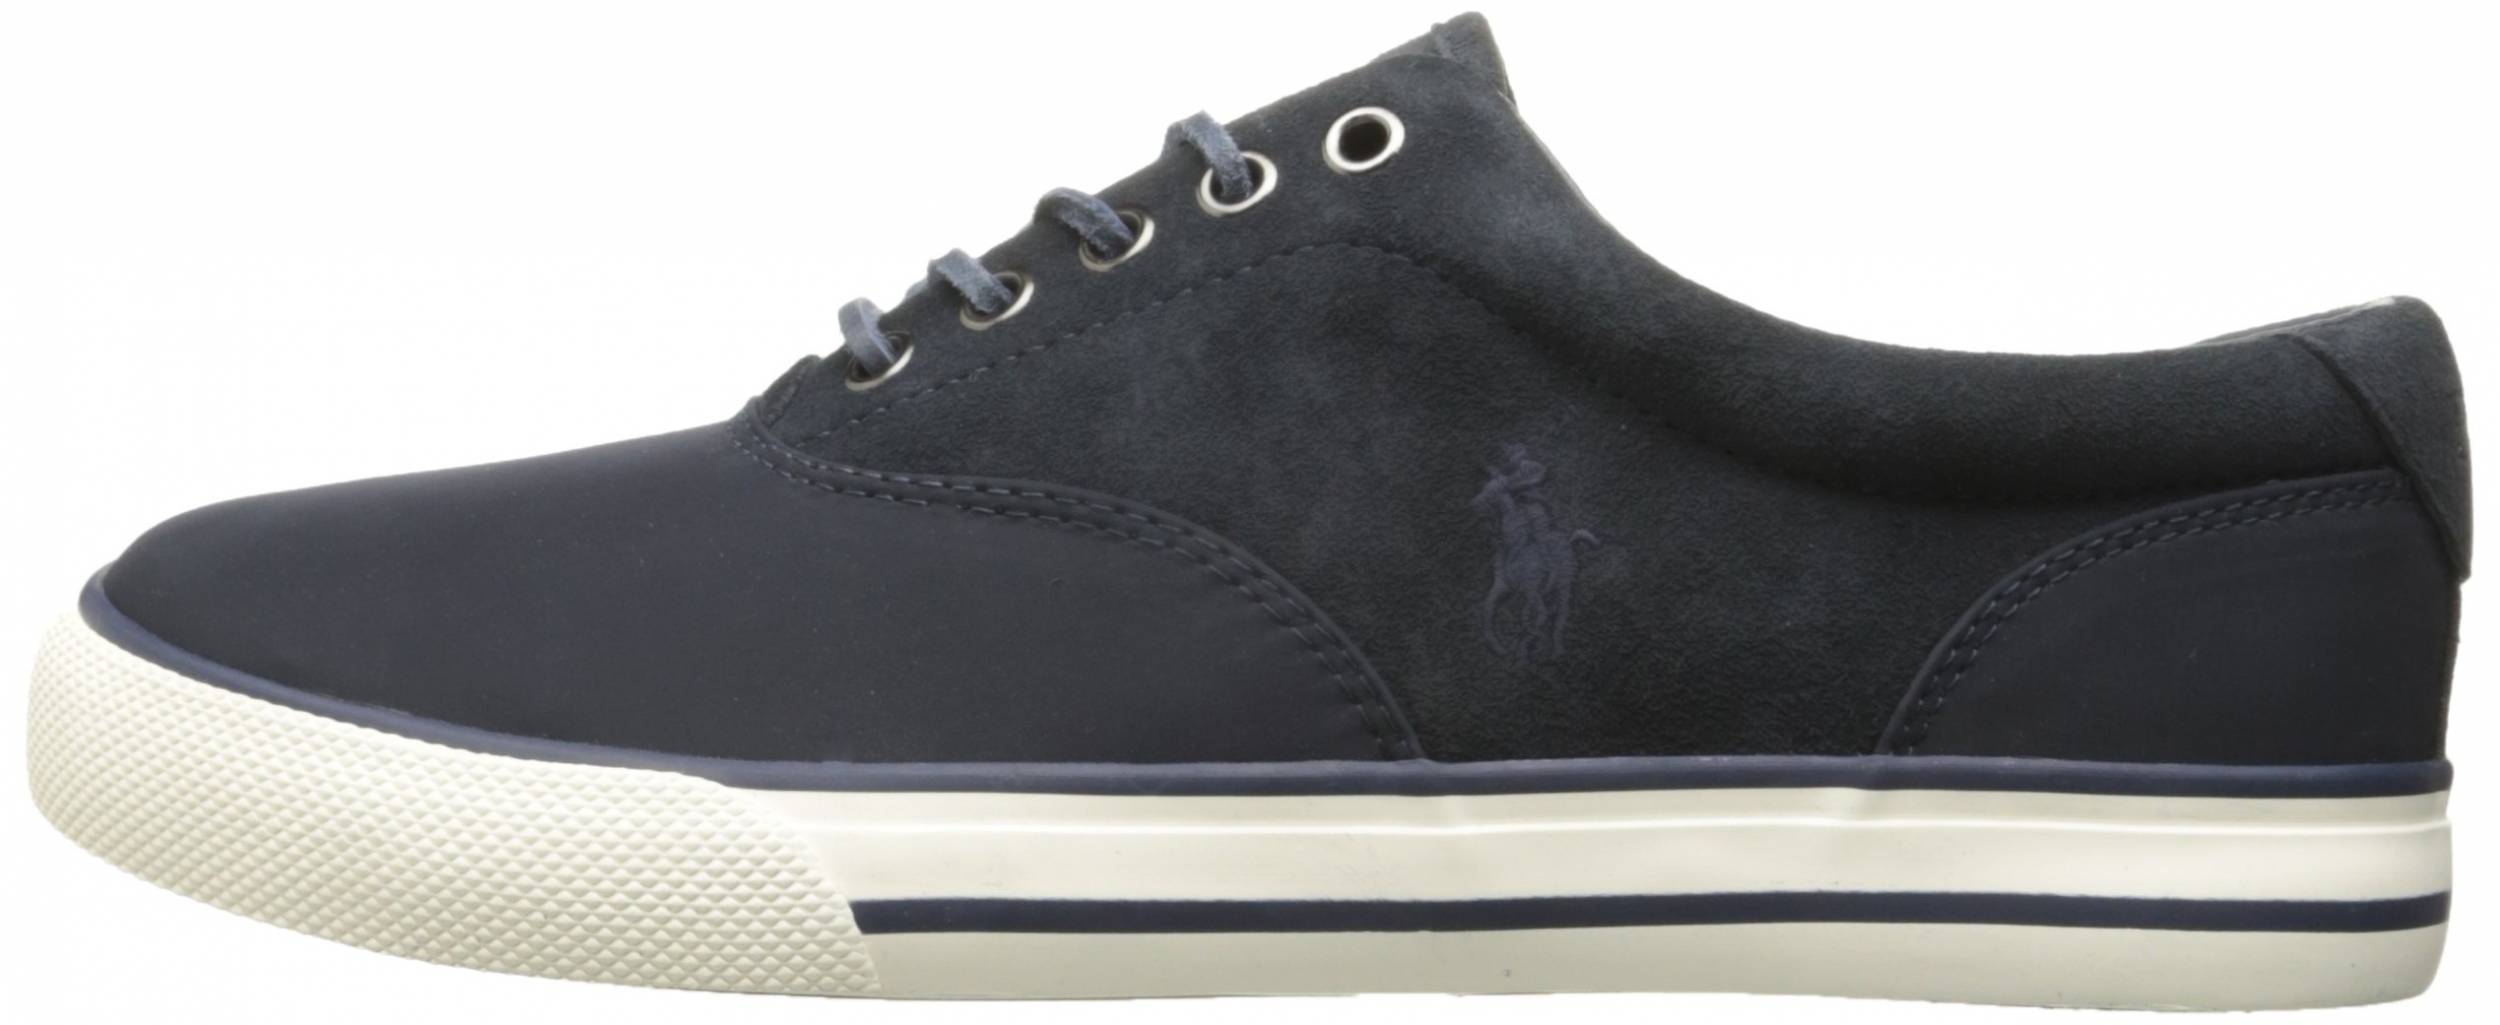 Save 45% on Polo Ralph Lauren Sneakers 